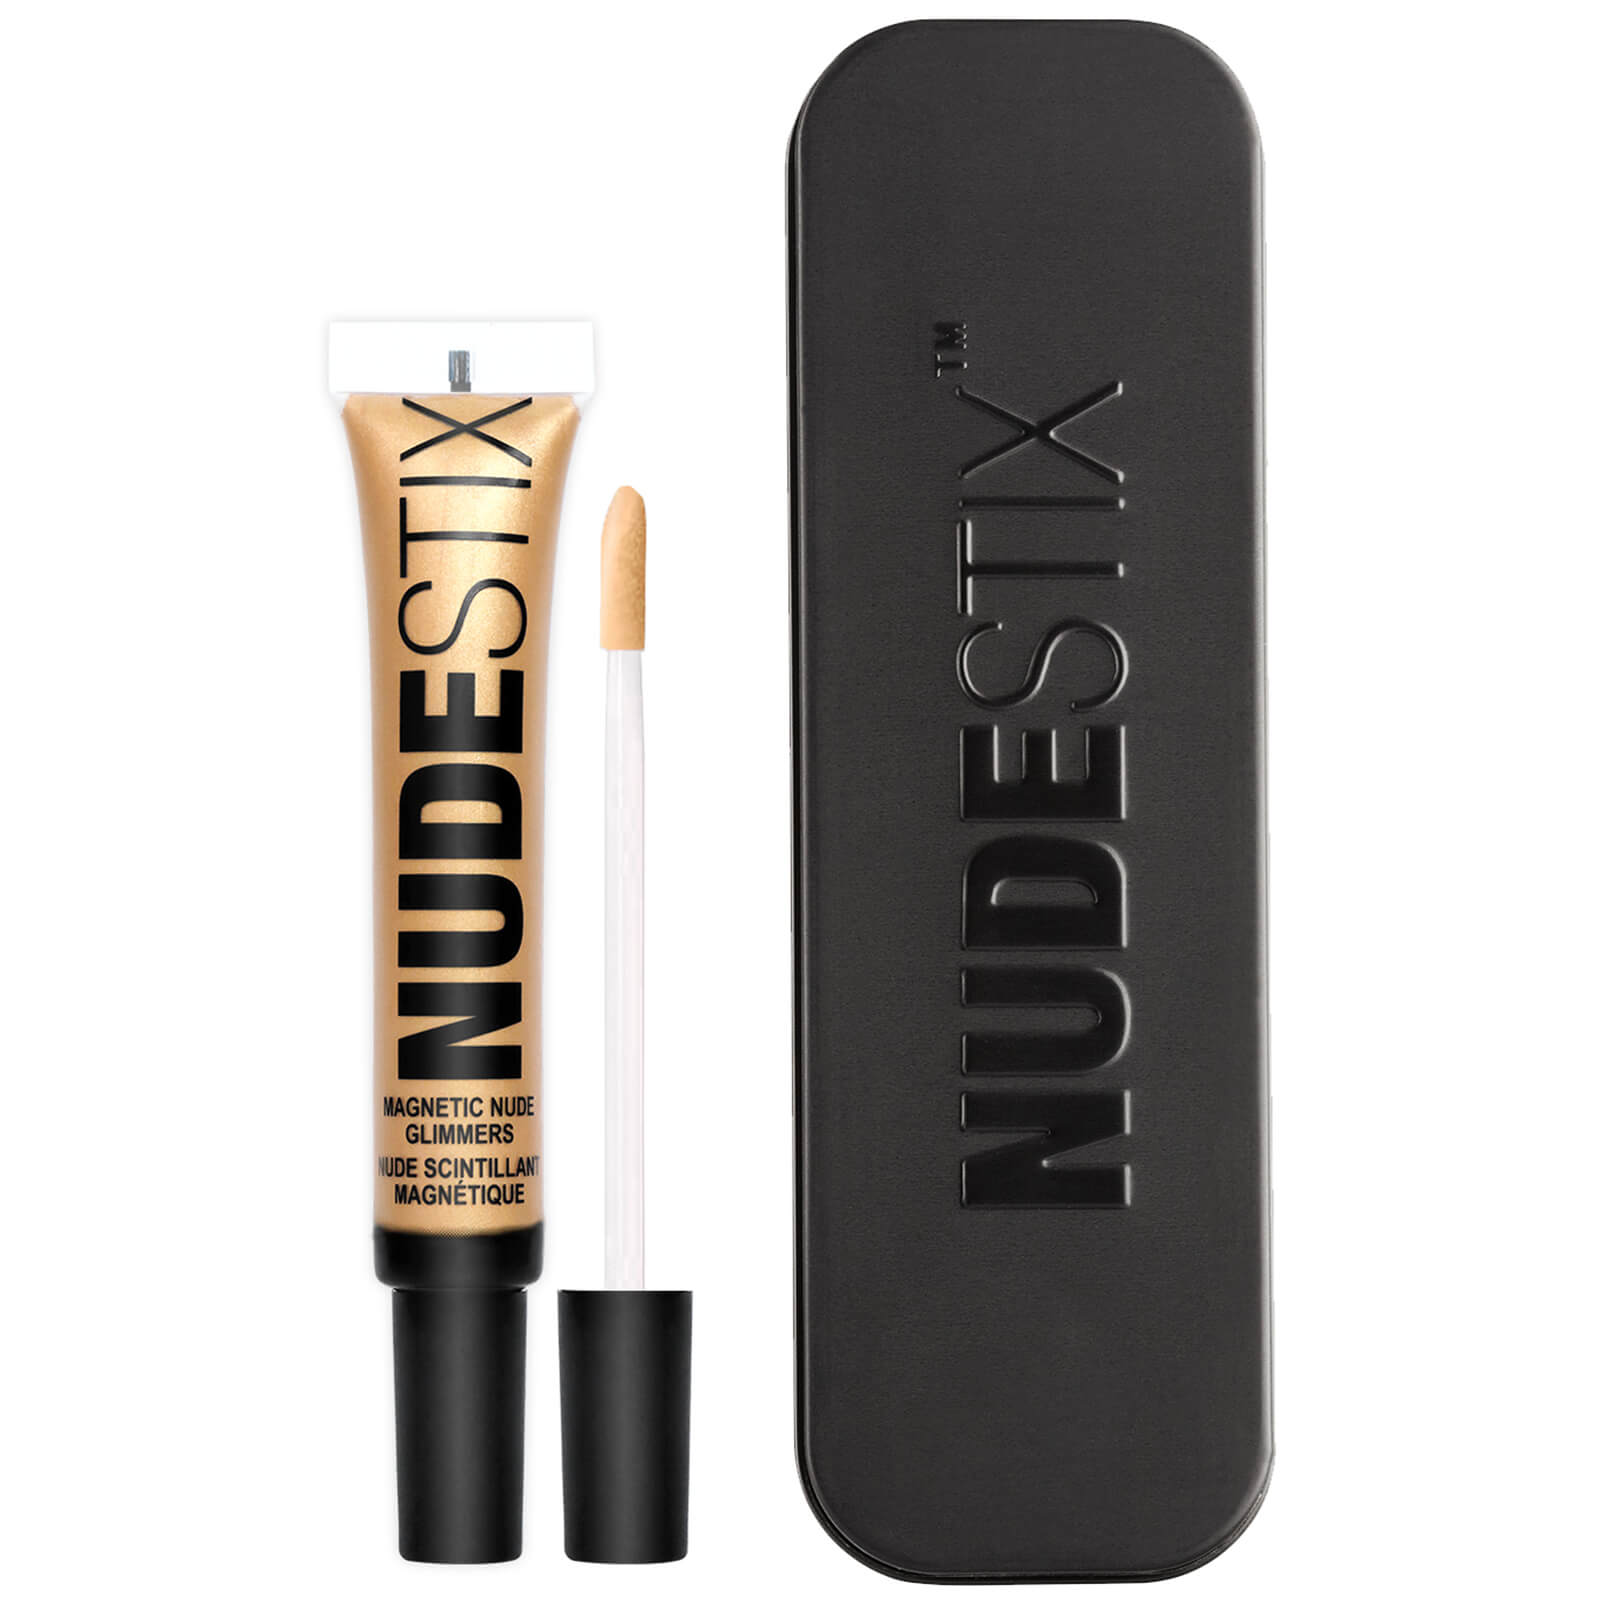 NUDESTIX MAGNETIC NUDE GLIMMER (VARIOUS SHADES),NMNG24KG